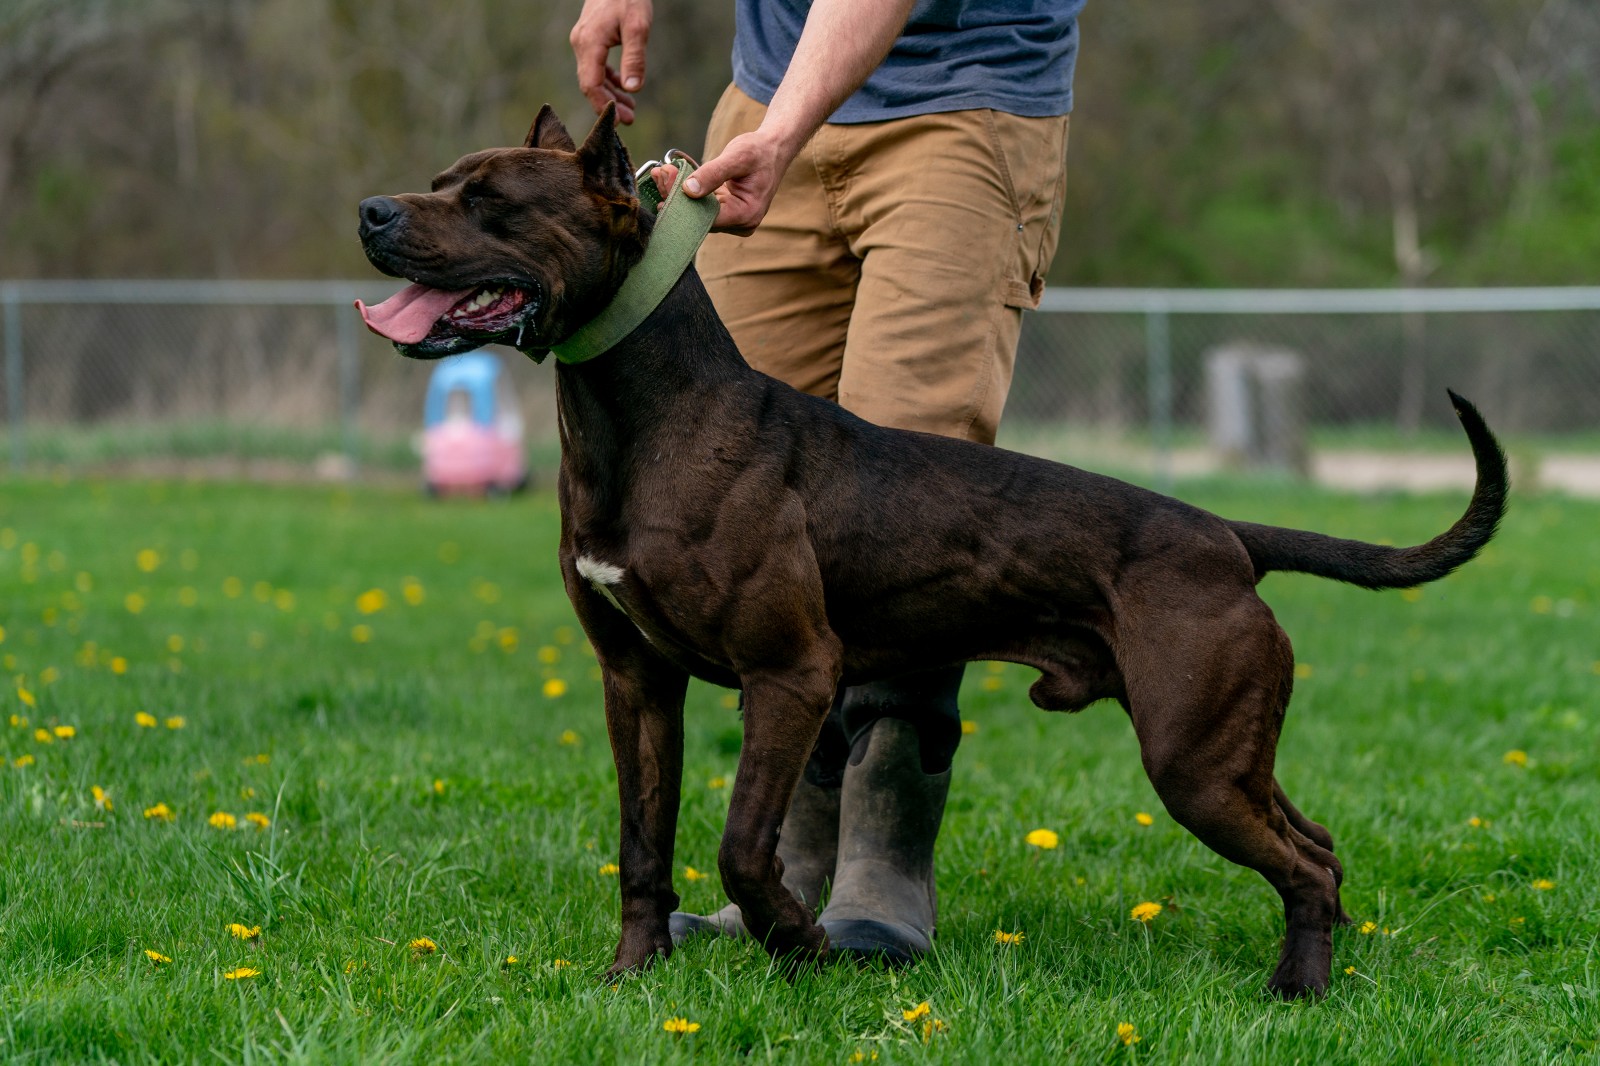 Hitman, a black XL pitbull from Unleashed kennelz lunges, ripped muscles flexed, in a side profile shot with his owner holding him by the green collar. 